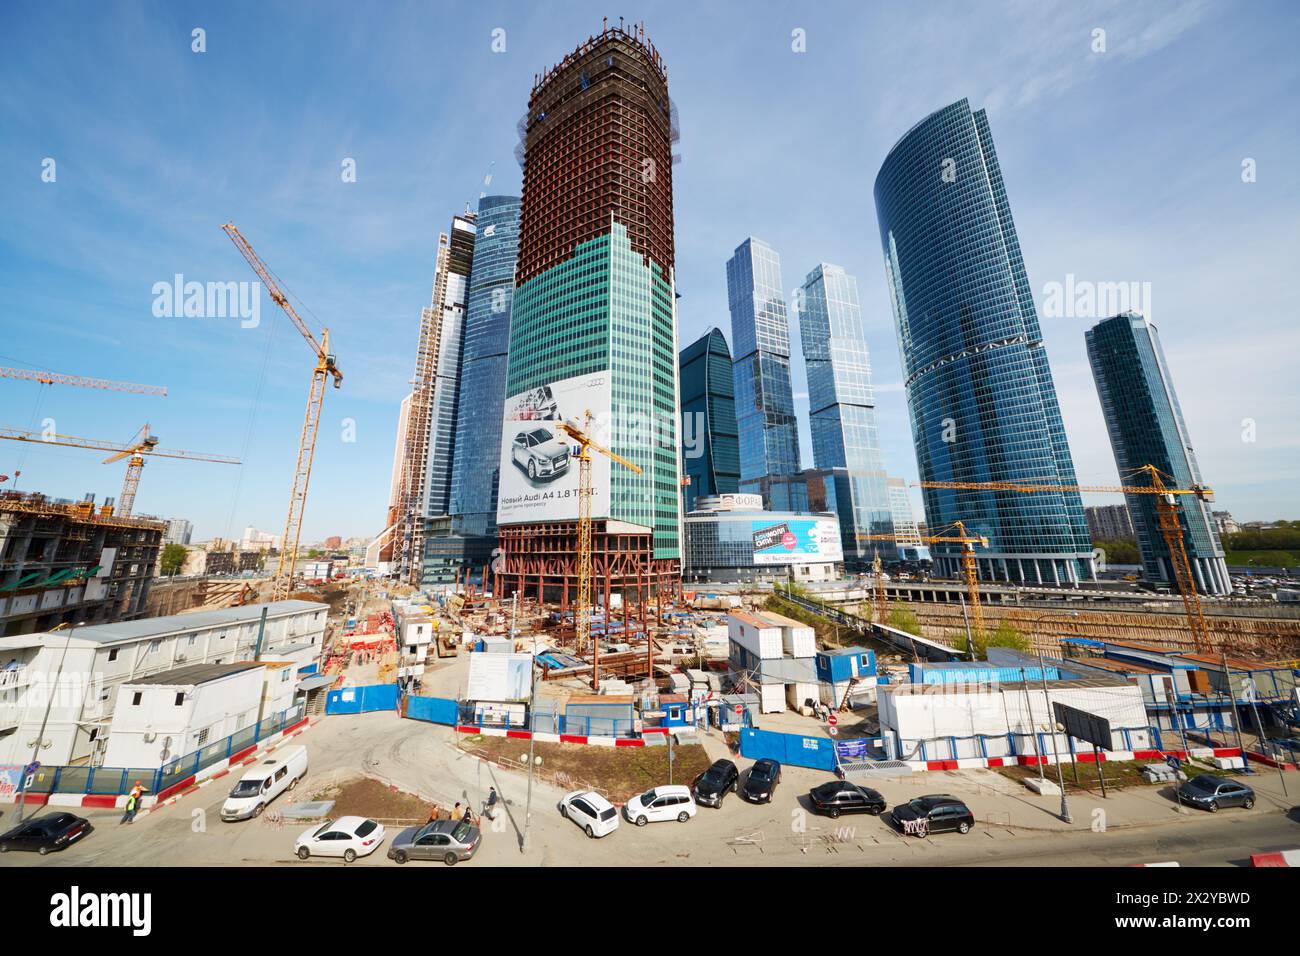 MOSCOW - MAY 2: Construction site of Moscow International Business Center , May 2, 2012, Moscow, Russia. Moscow IBC also referred to as Moscva-City, i Stock Photo